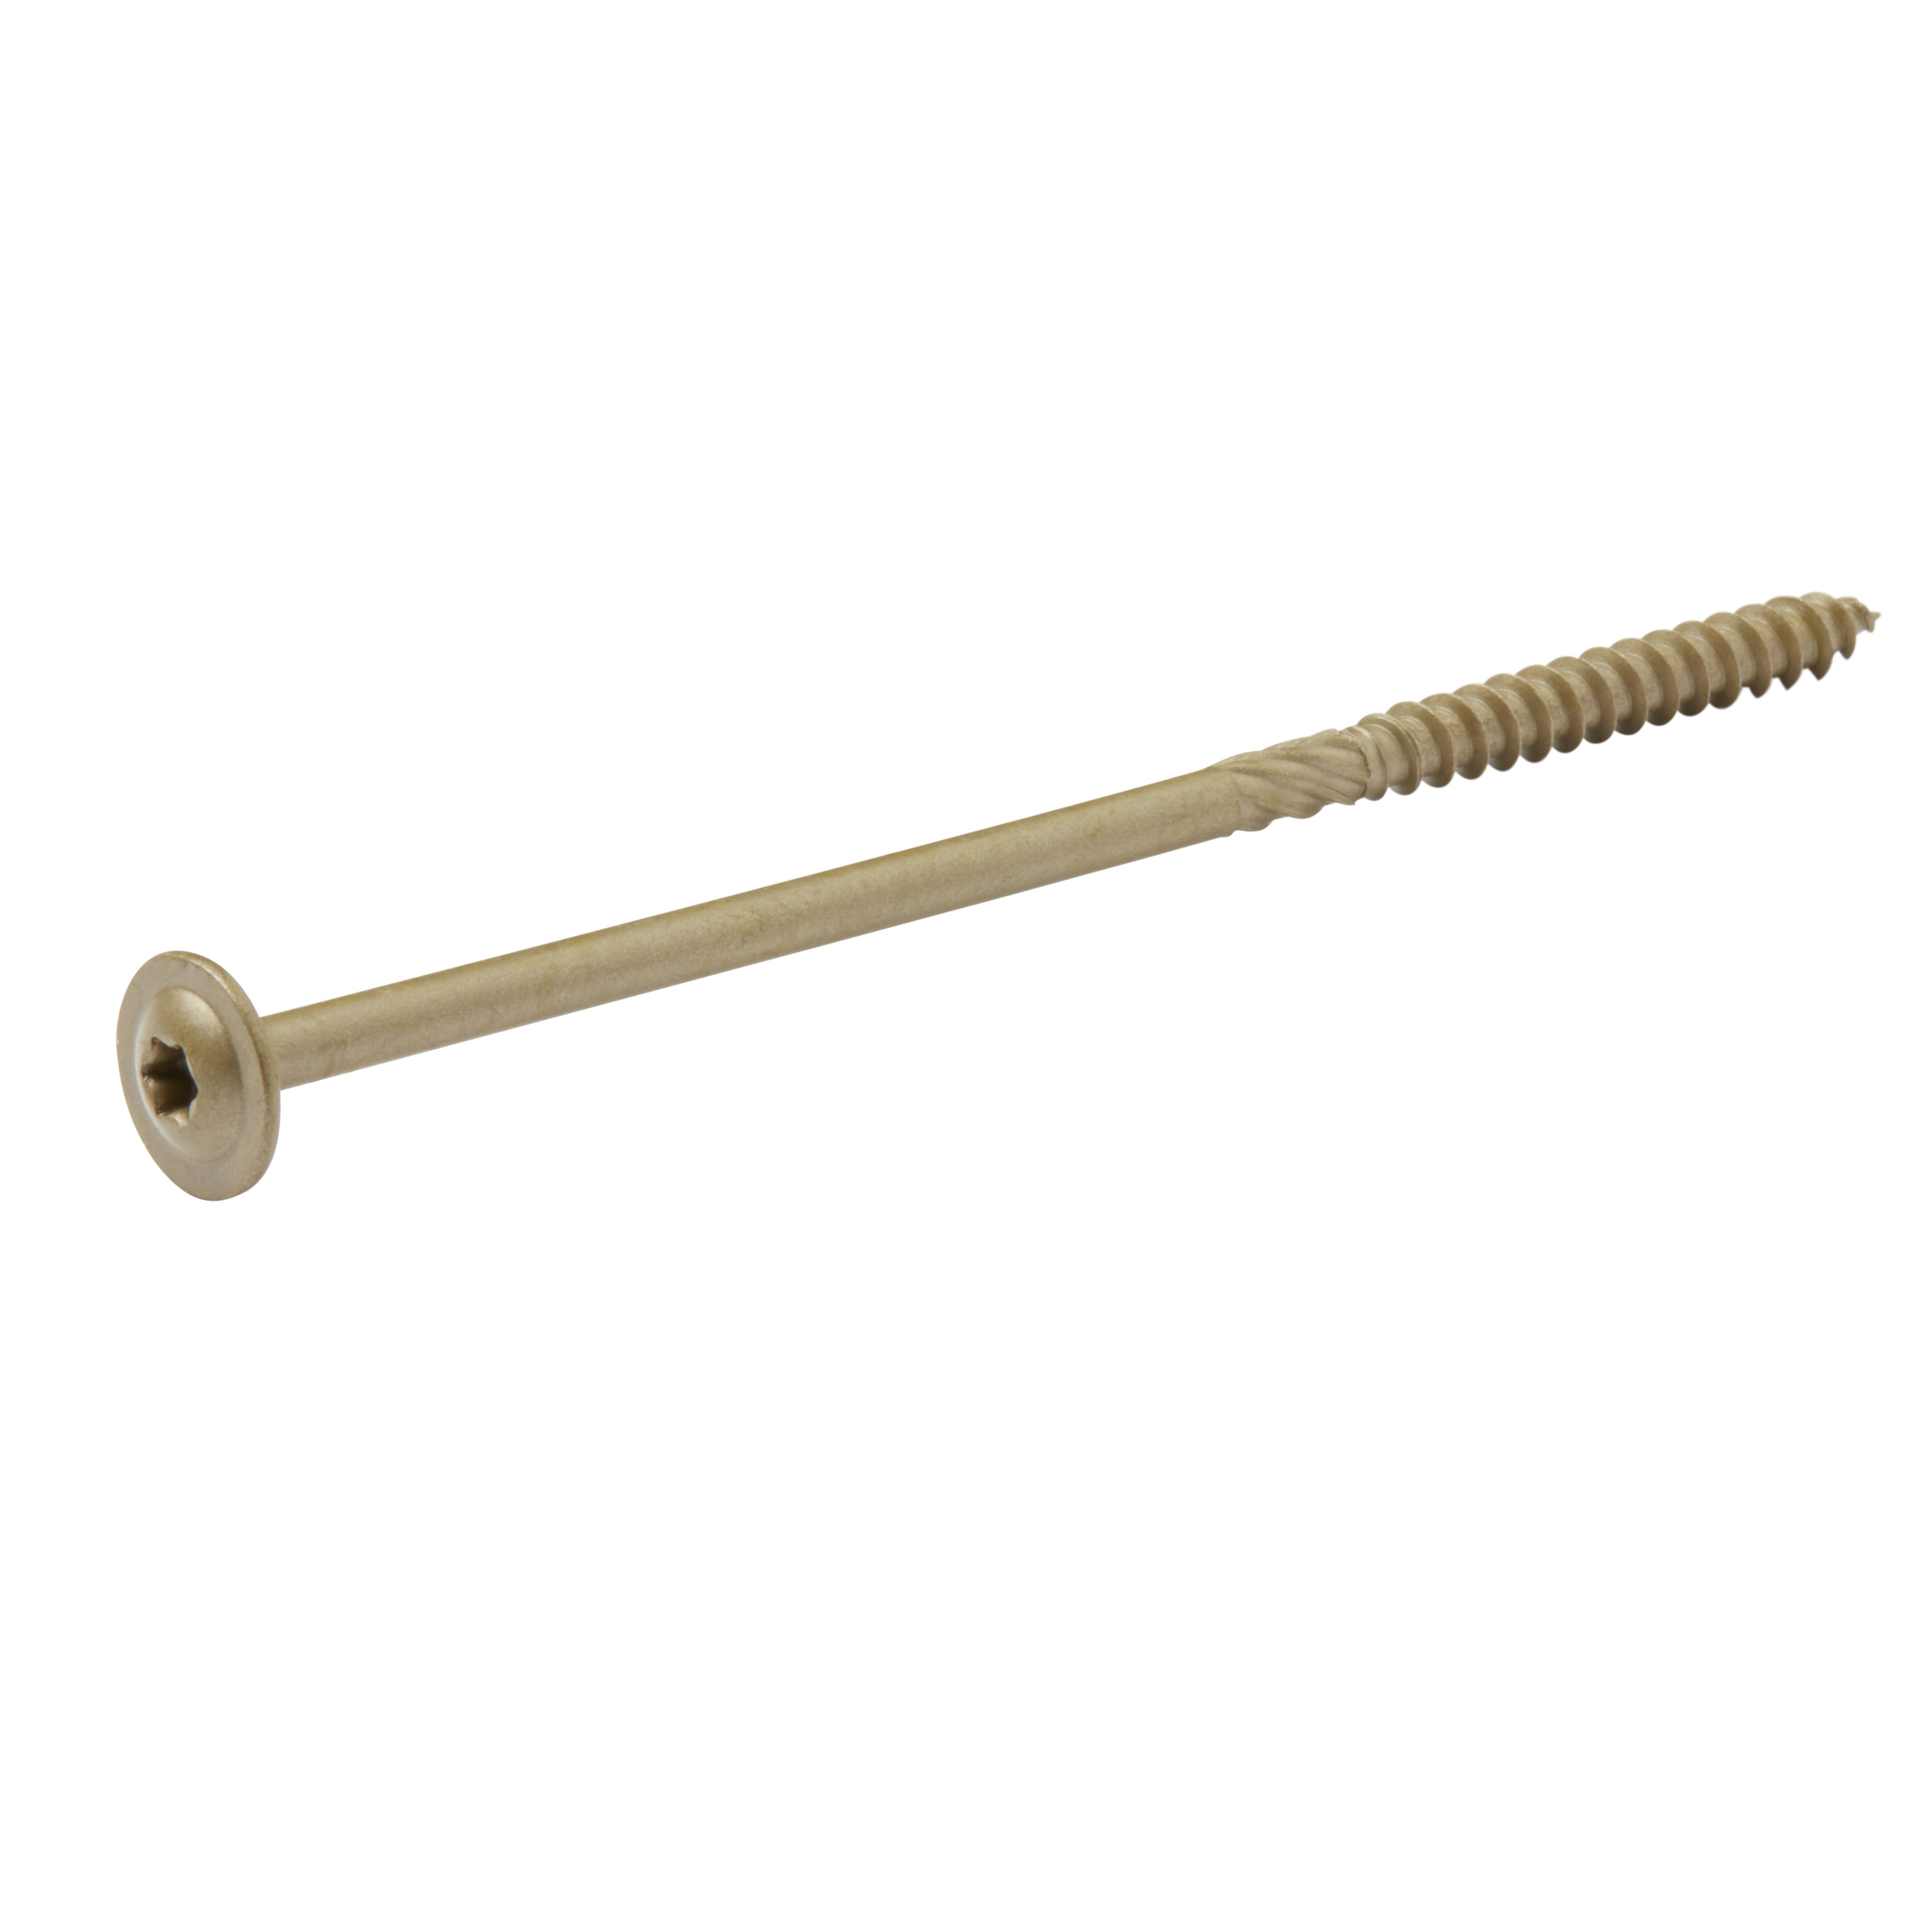 Diall Wafer Carbon steel Screw (Dia)6.7mm (L)150mm, Pack of 25